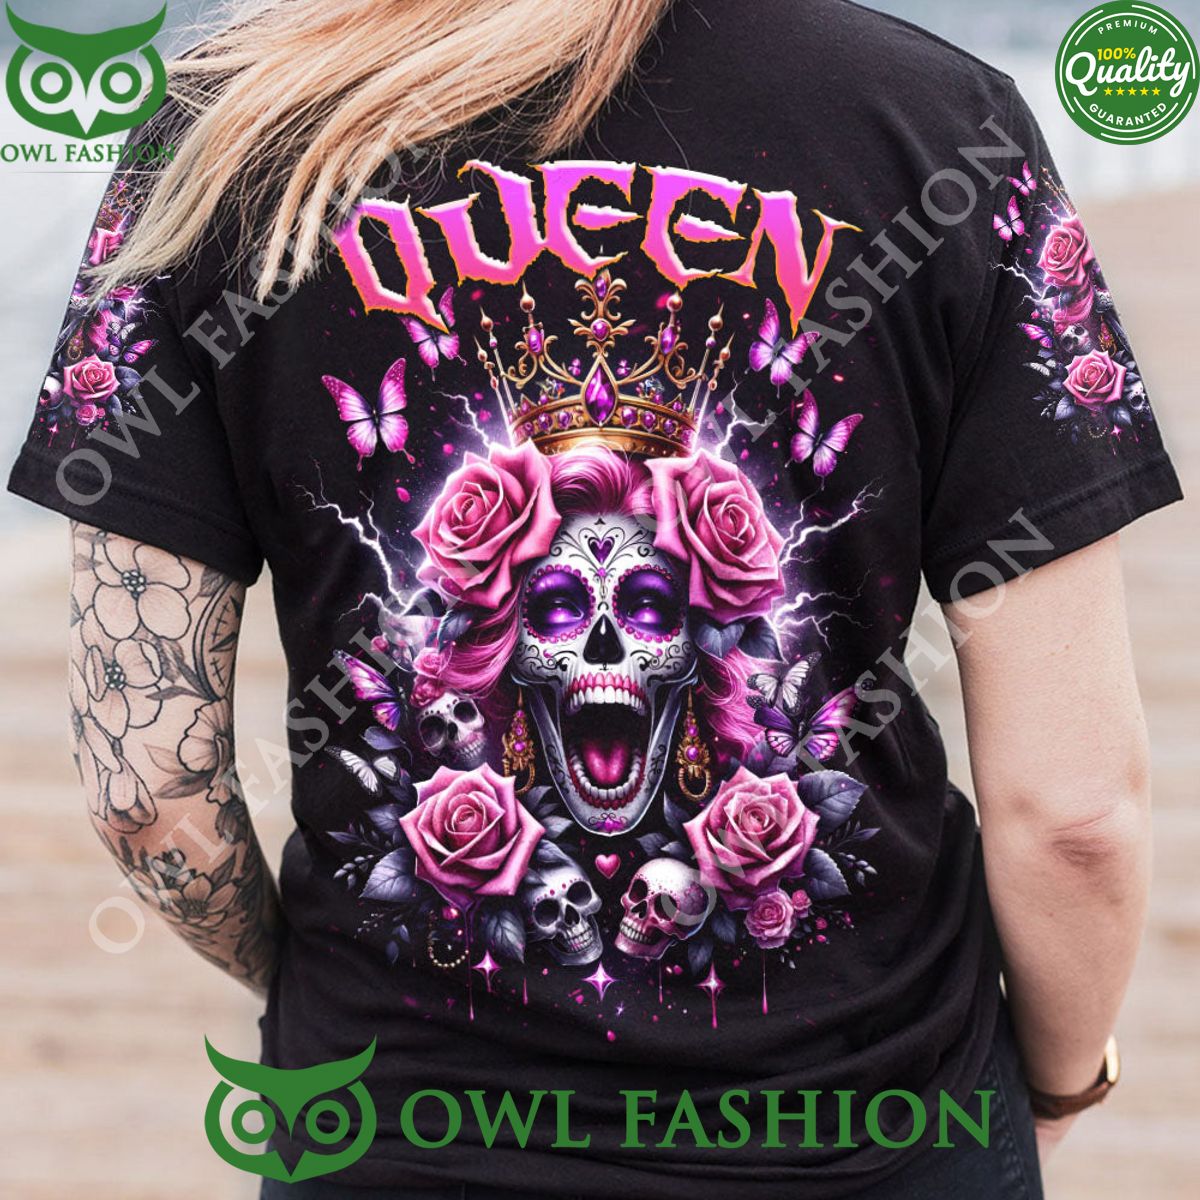 King Queen Skull Rose Couple Aop Hoodie Shirt You tried editing this time?